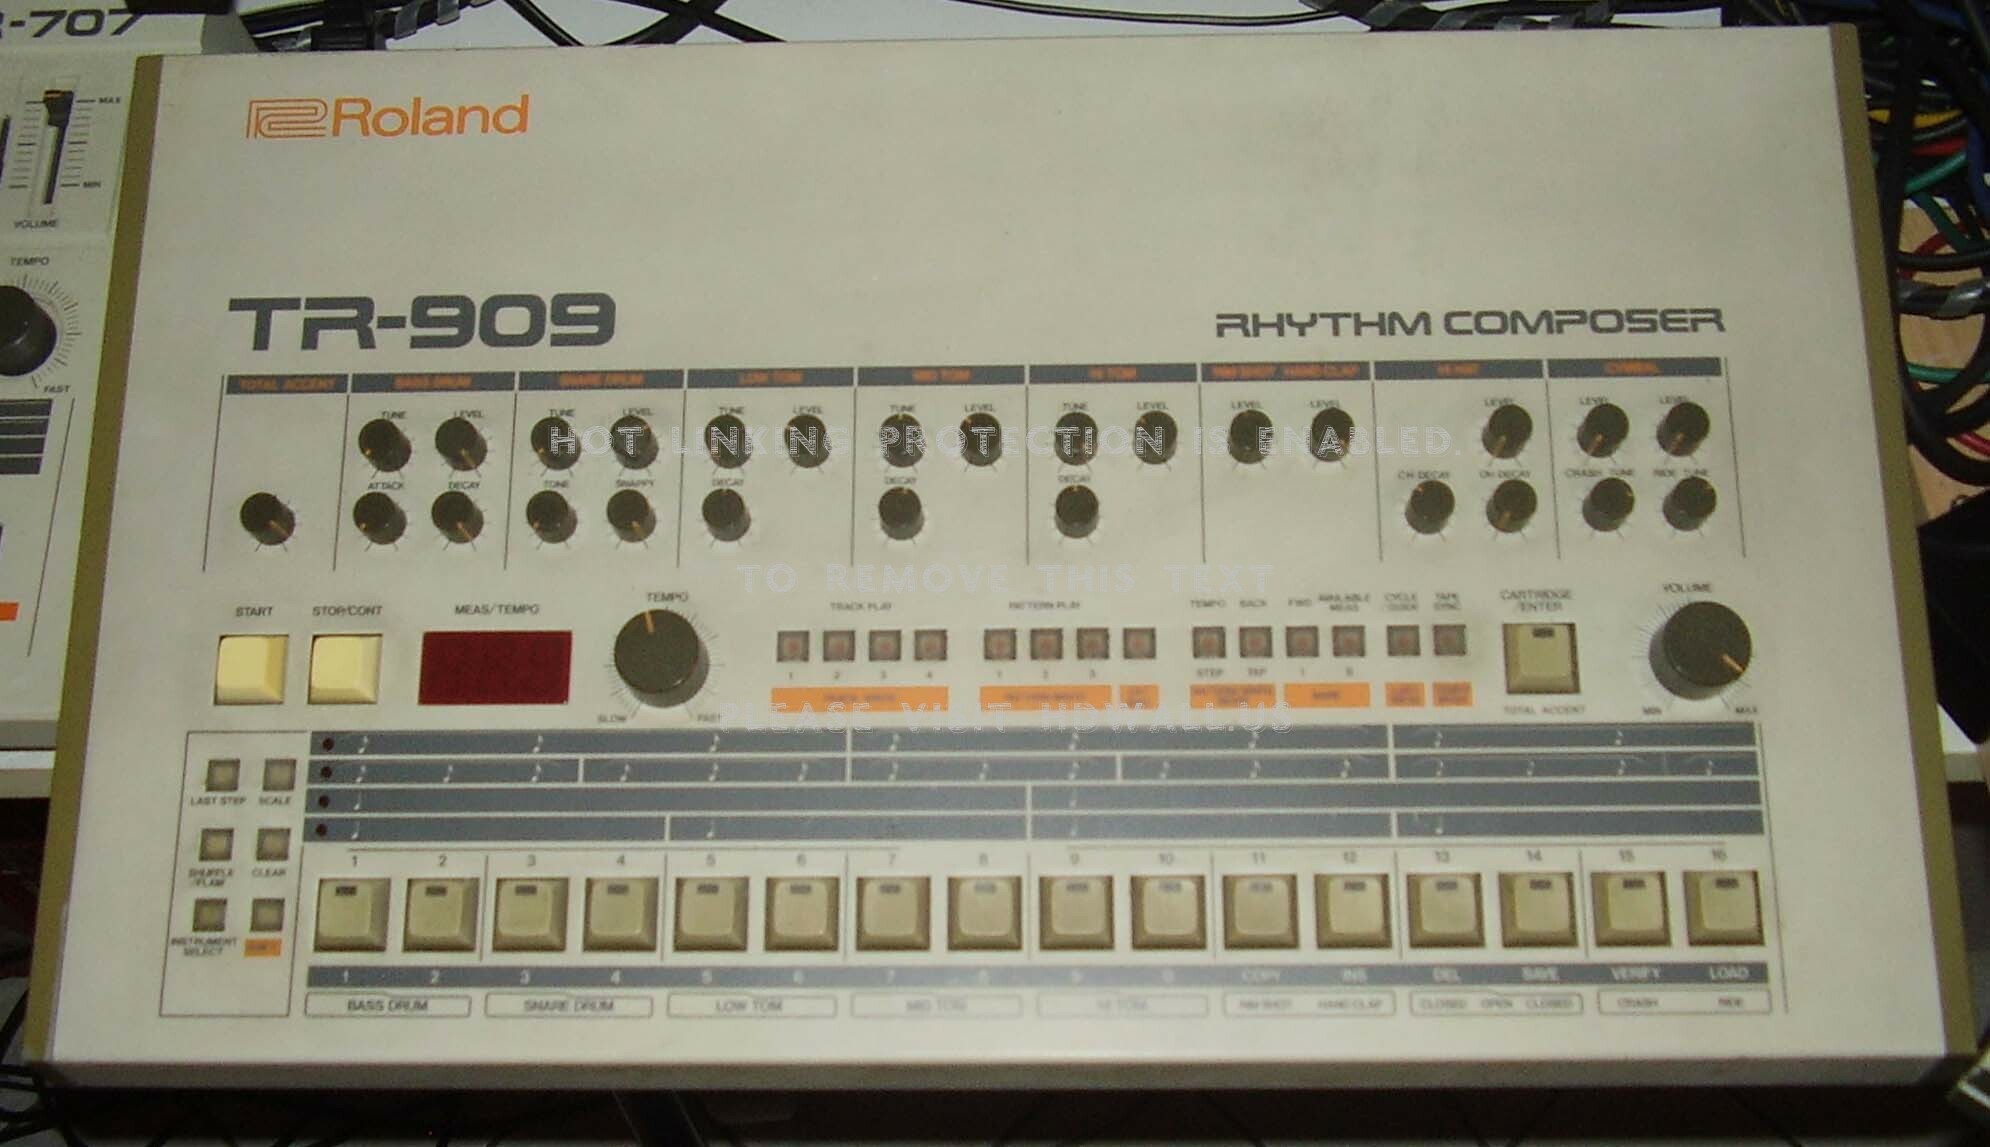 Turntables Synthesizer - Tr 909 , HD Wallpaper & Backgrounds